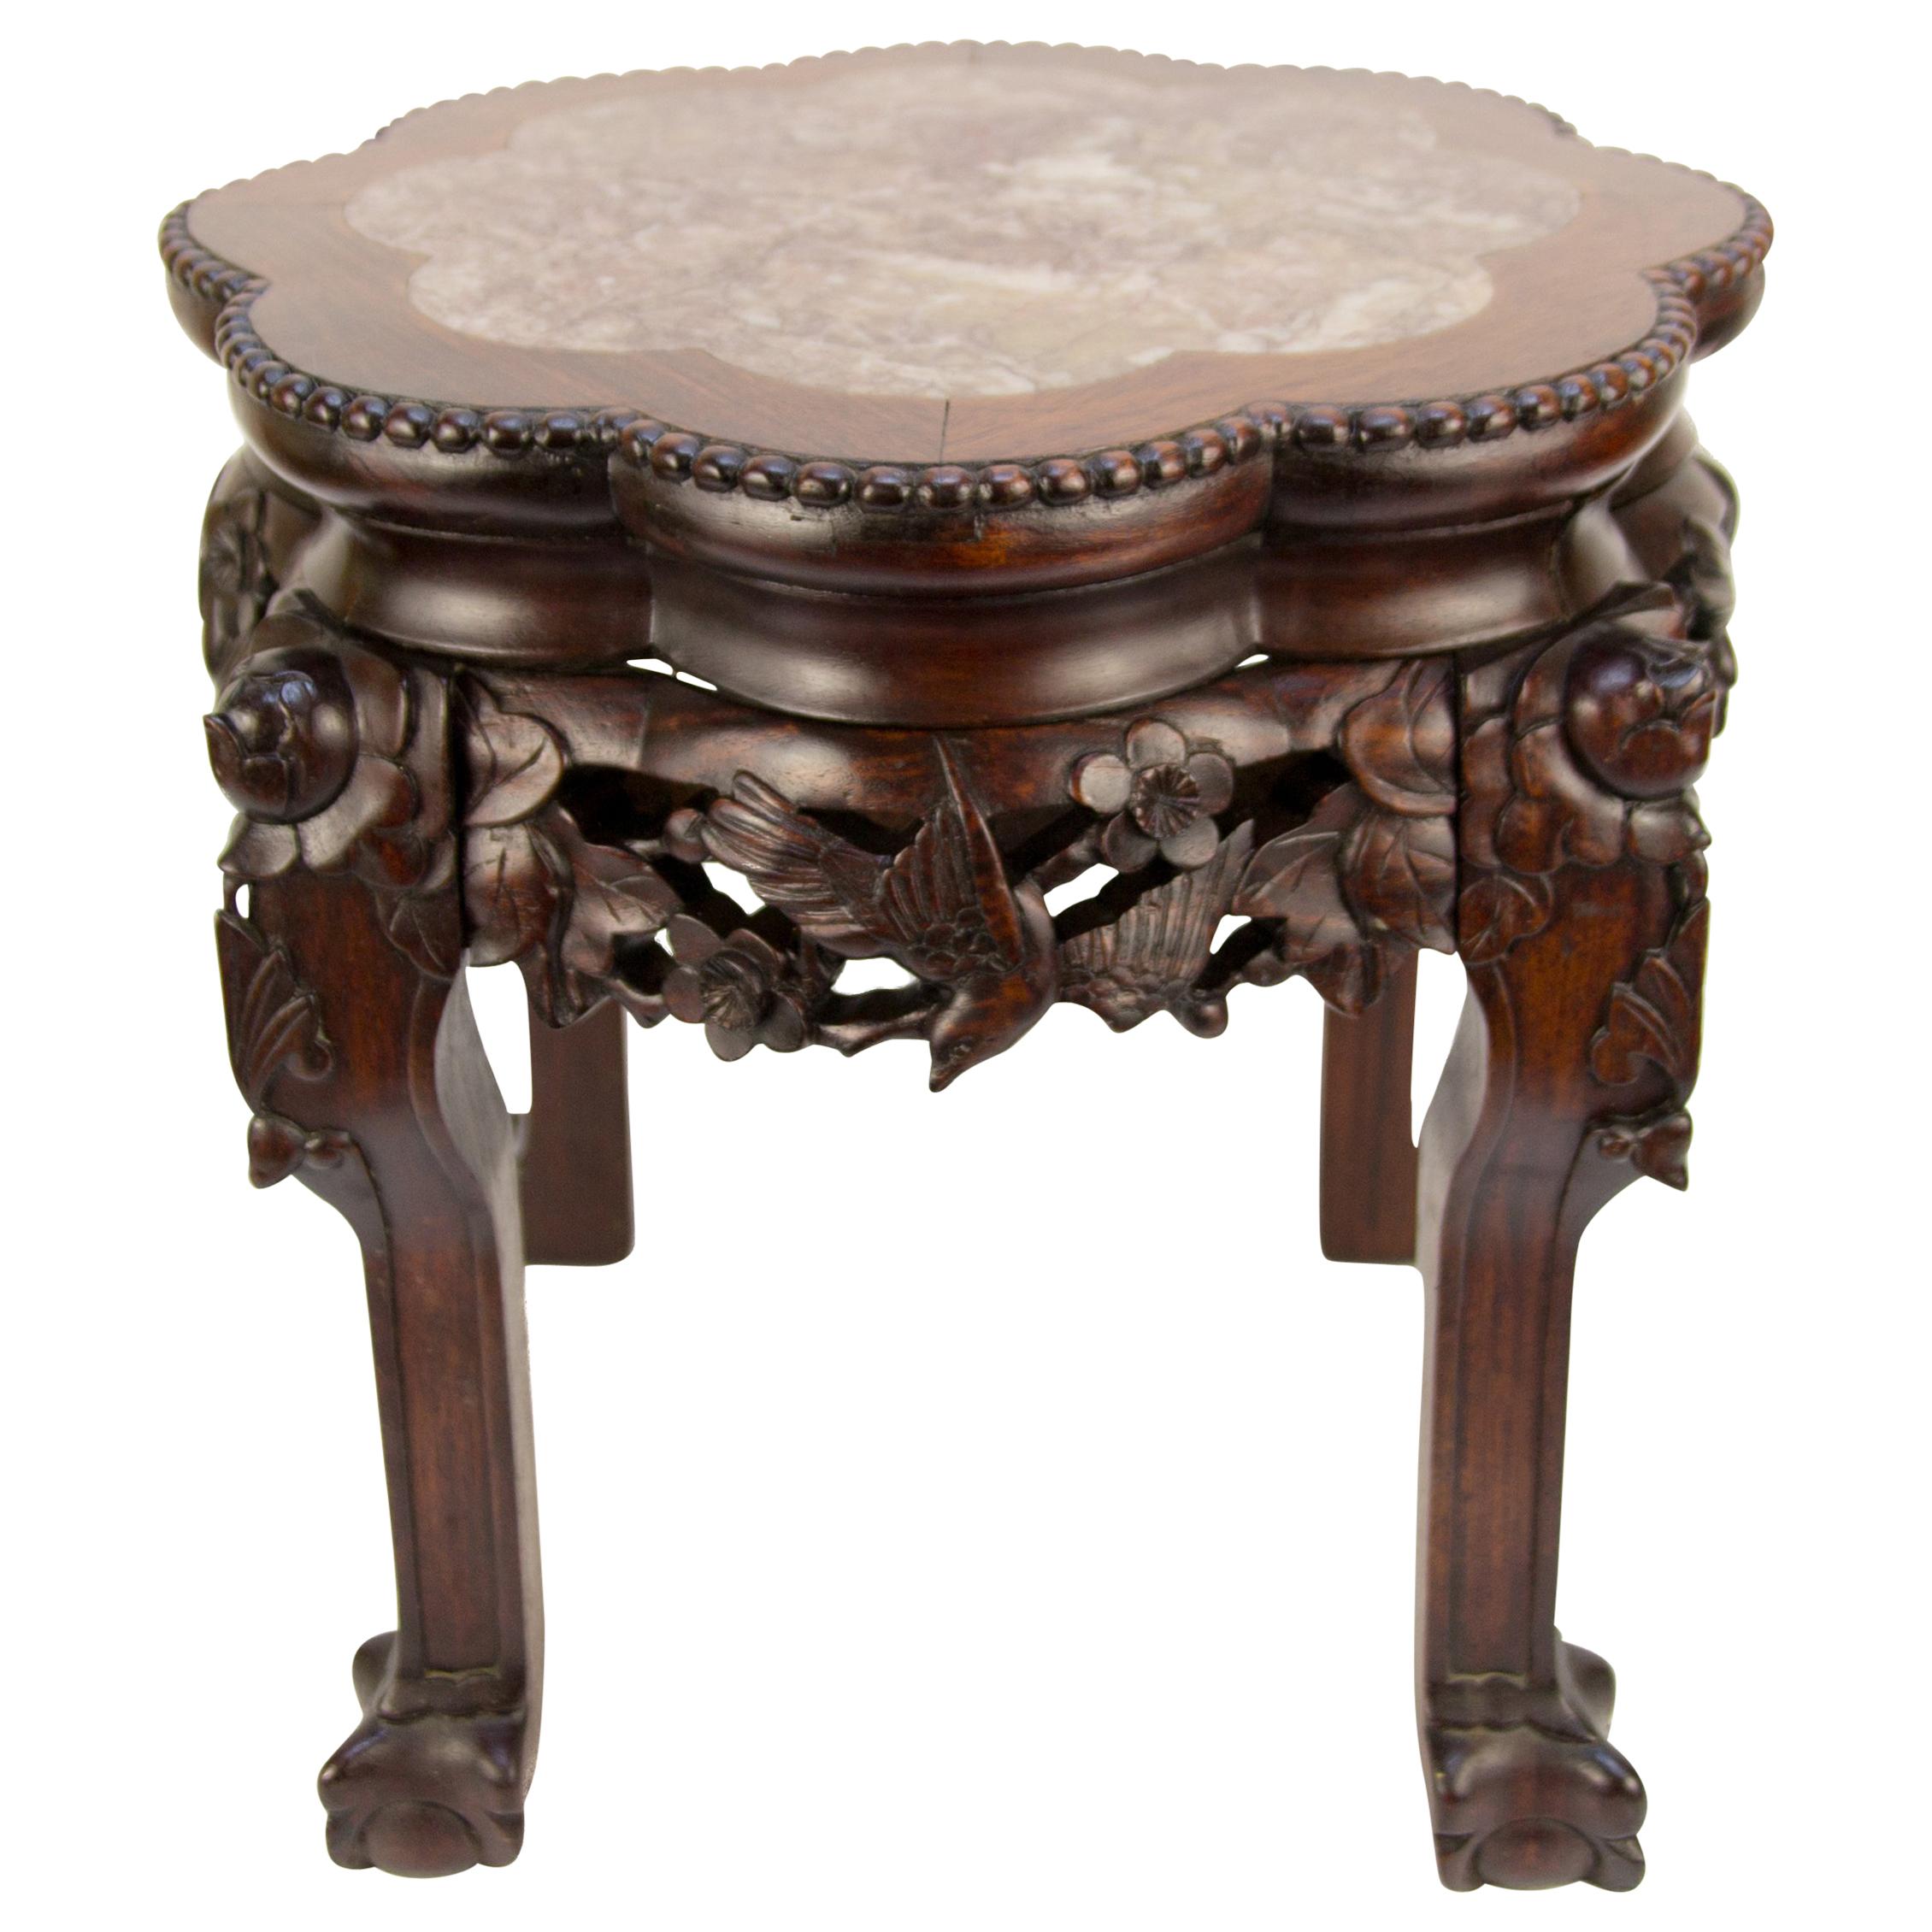 Chinese Carved Hardwood Pot Stand with Shaped Marble Inlaid Top